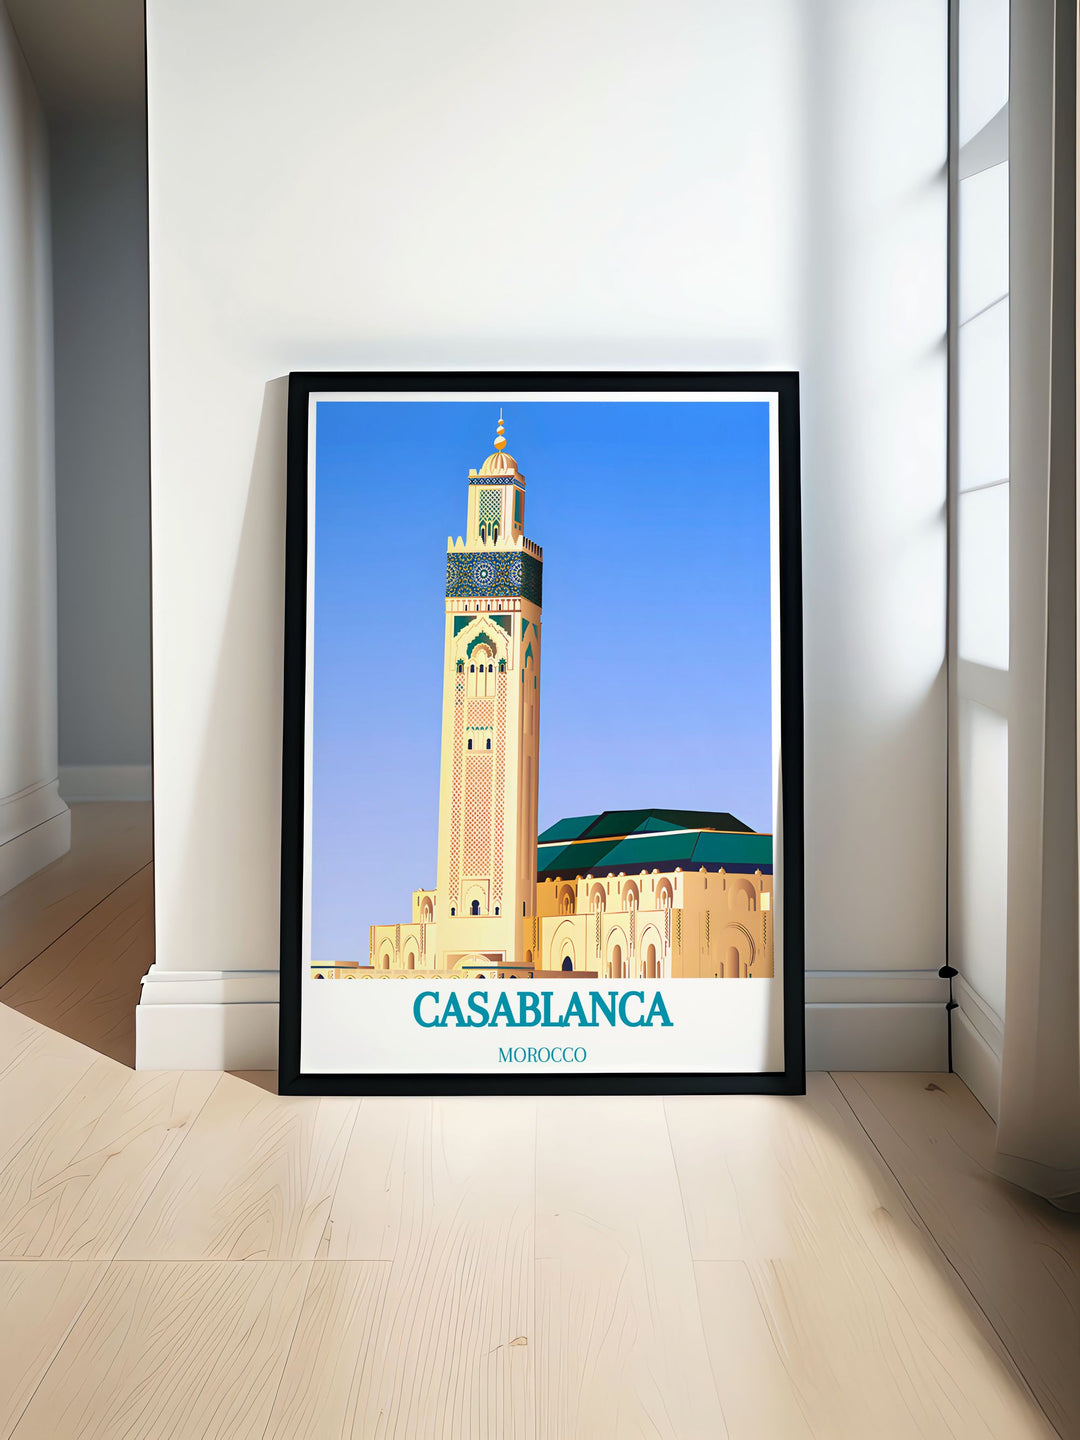 Casablanca at dusk art print, portraying the city's vibrant nightlife and illuminated streets, a must-have for collectors of travel and cityscape art.